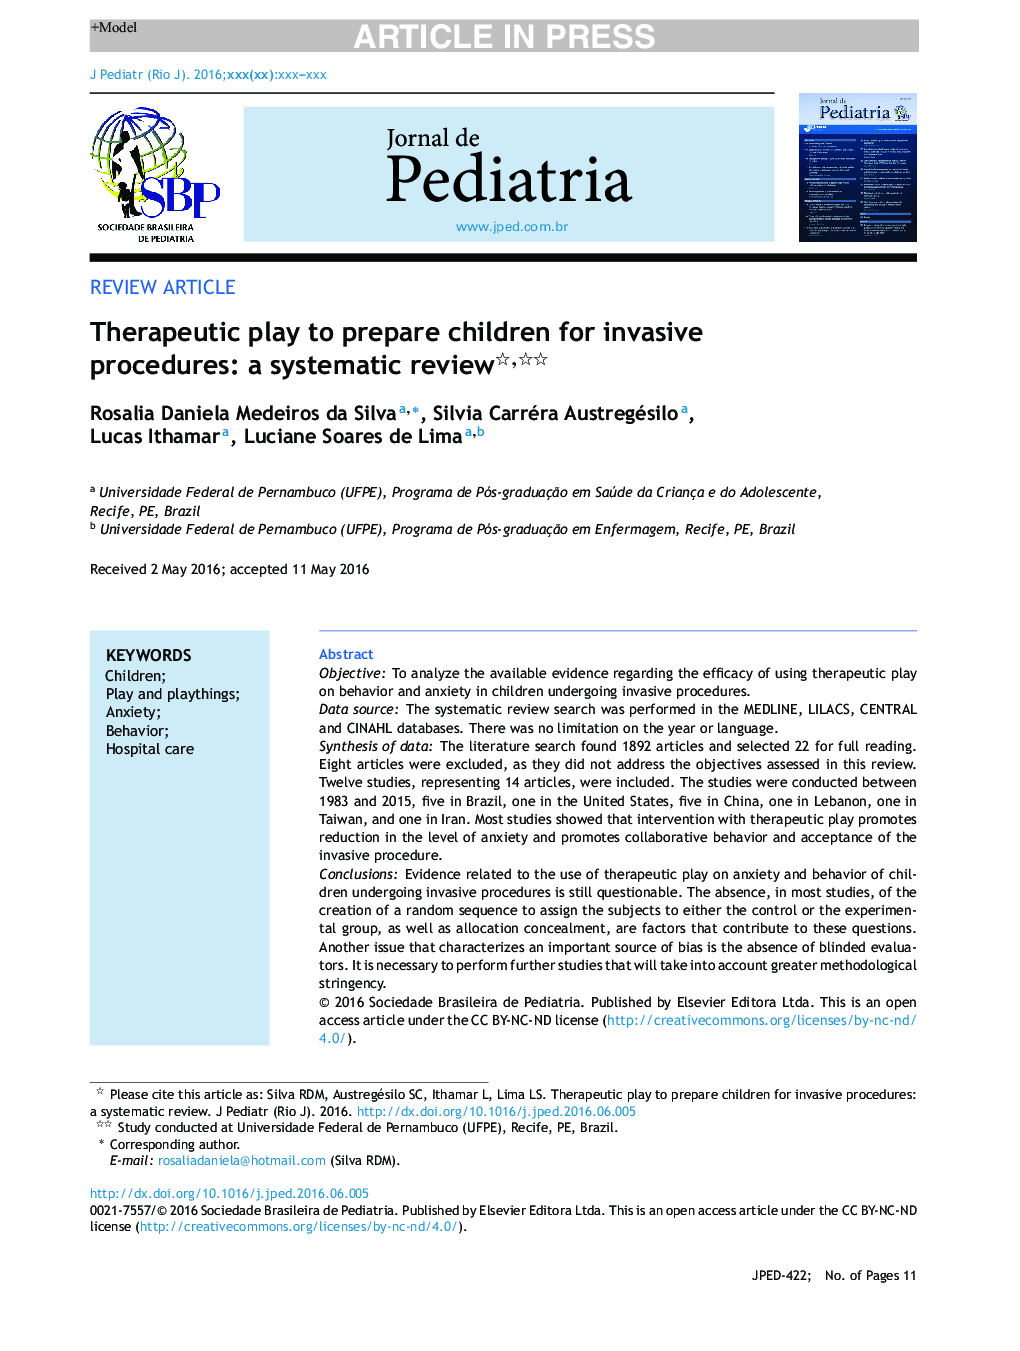 Therapeutic play to prepare children for invasive procedures: a systematic review